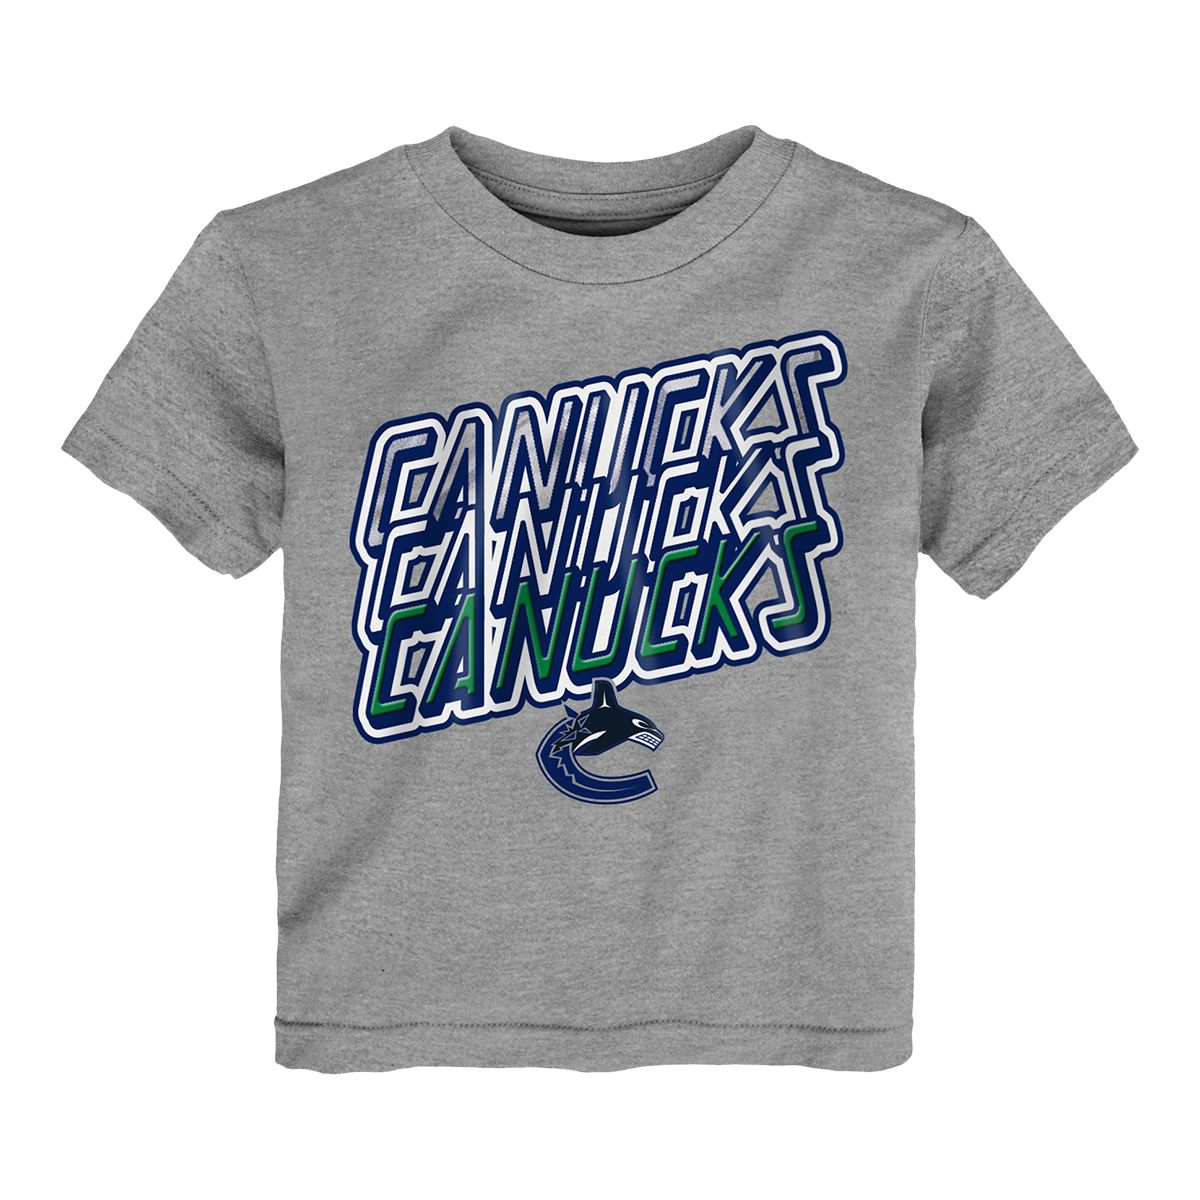 Outerstuff Youth Boys and Girls Black Vancouver Canucks Third